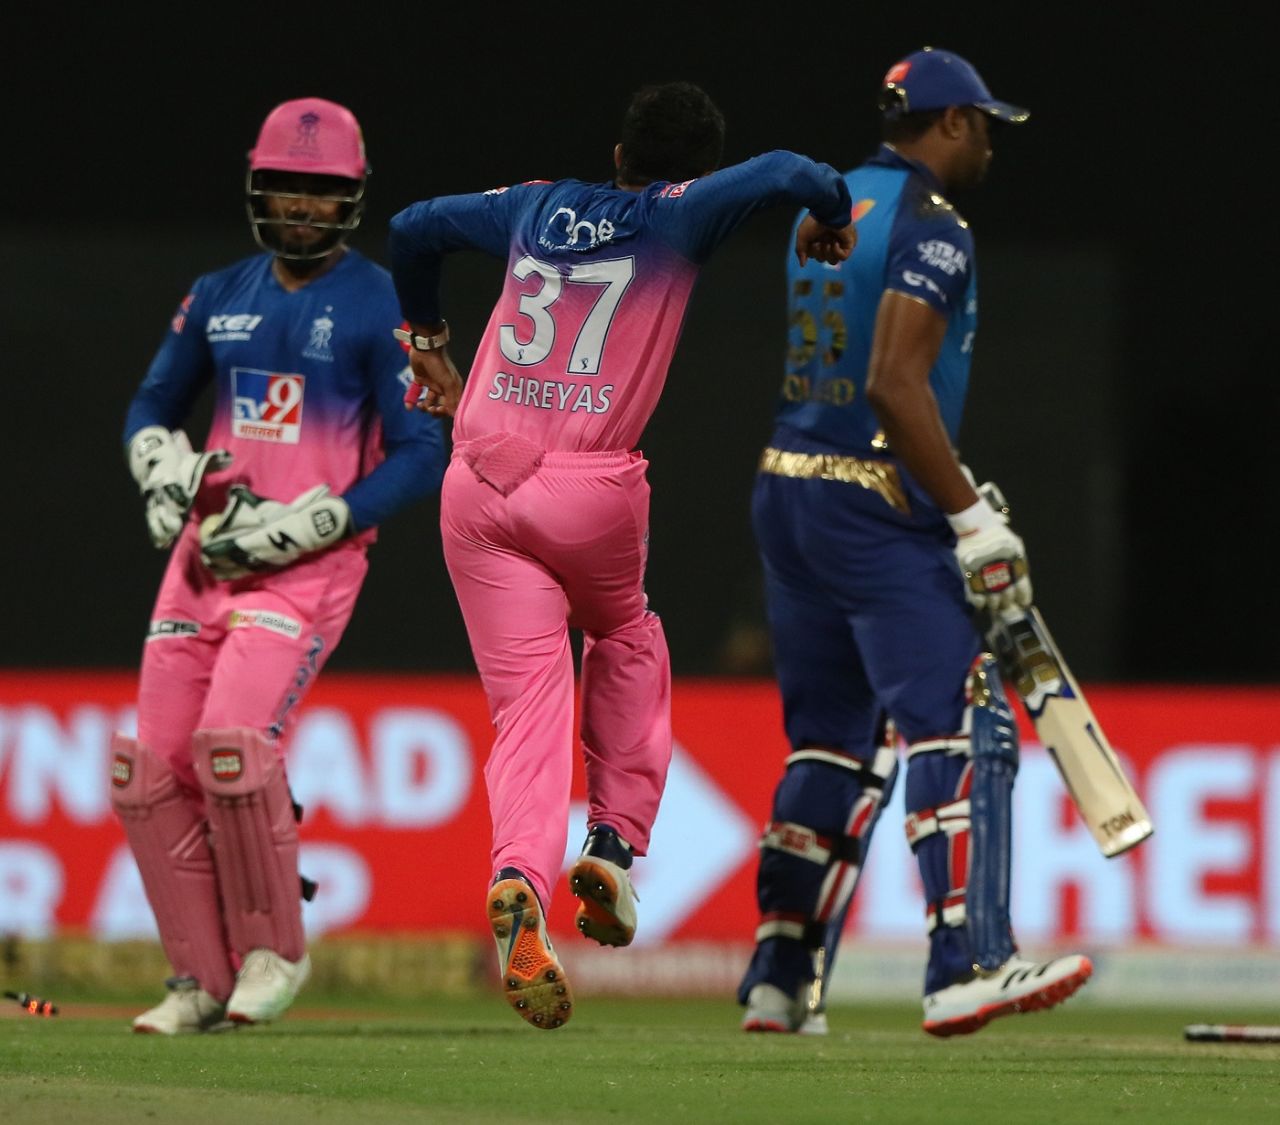 Shreyas Gopal picked up two wickets in one over, Rajasthan Royals vs Mumbai Indians, IPL 2020, Abu Dhabi, October 25, 2020